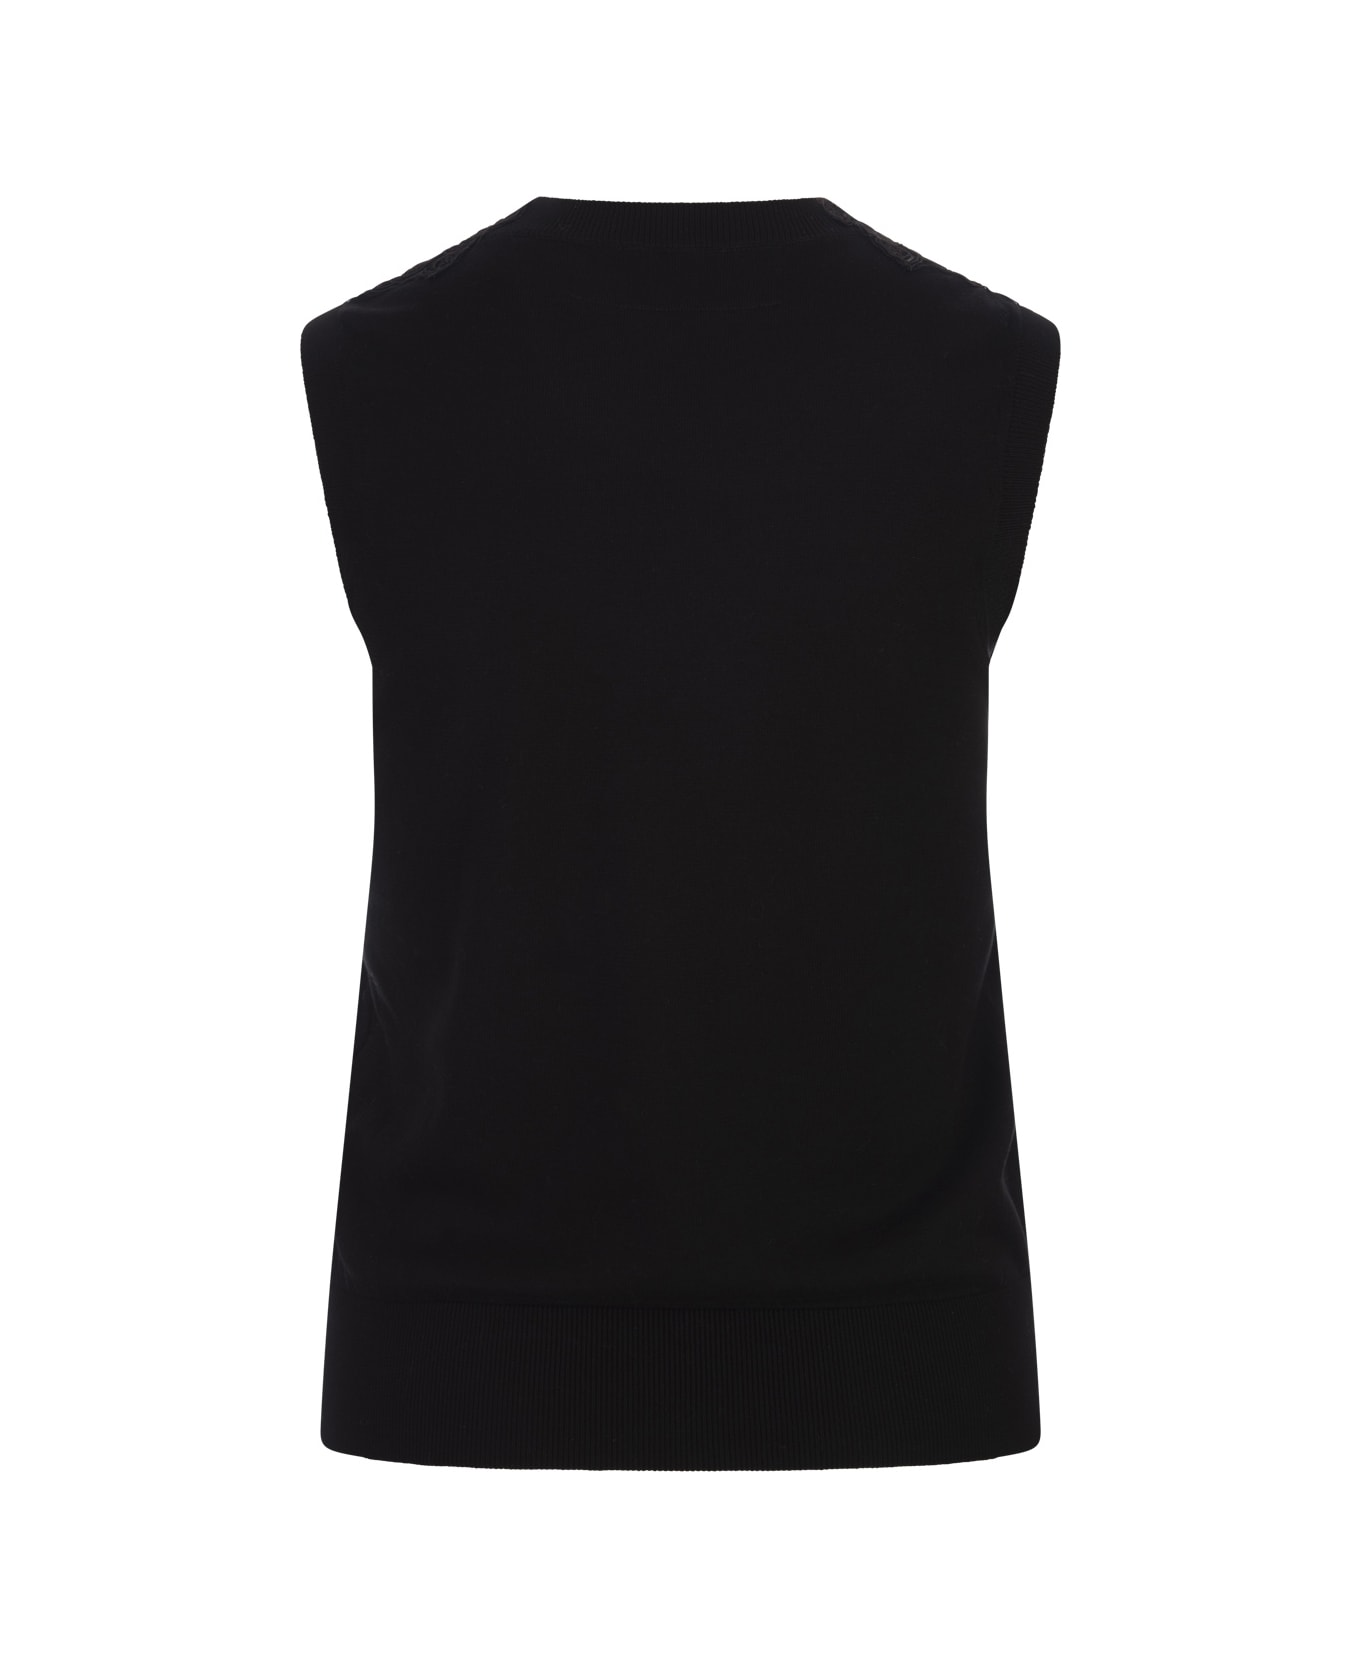 Ermanno Scervino Black Knitted Sleeveless Top With Lace - Black トップス